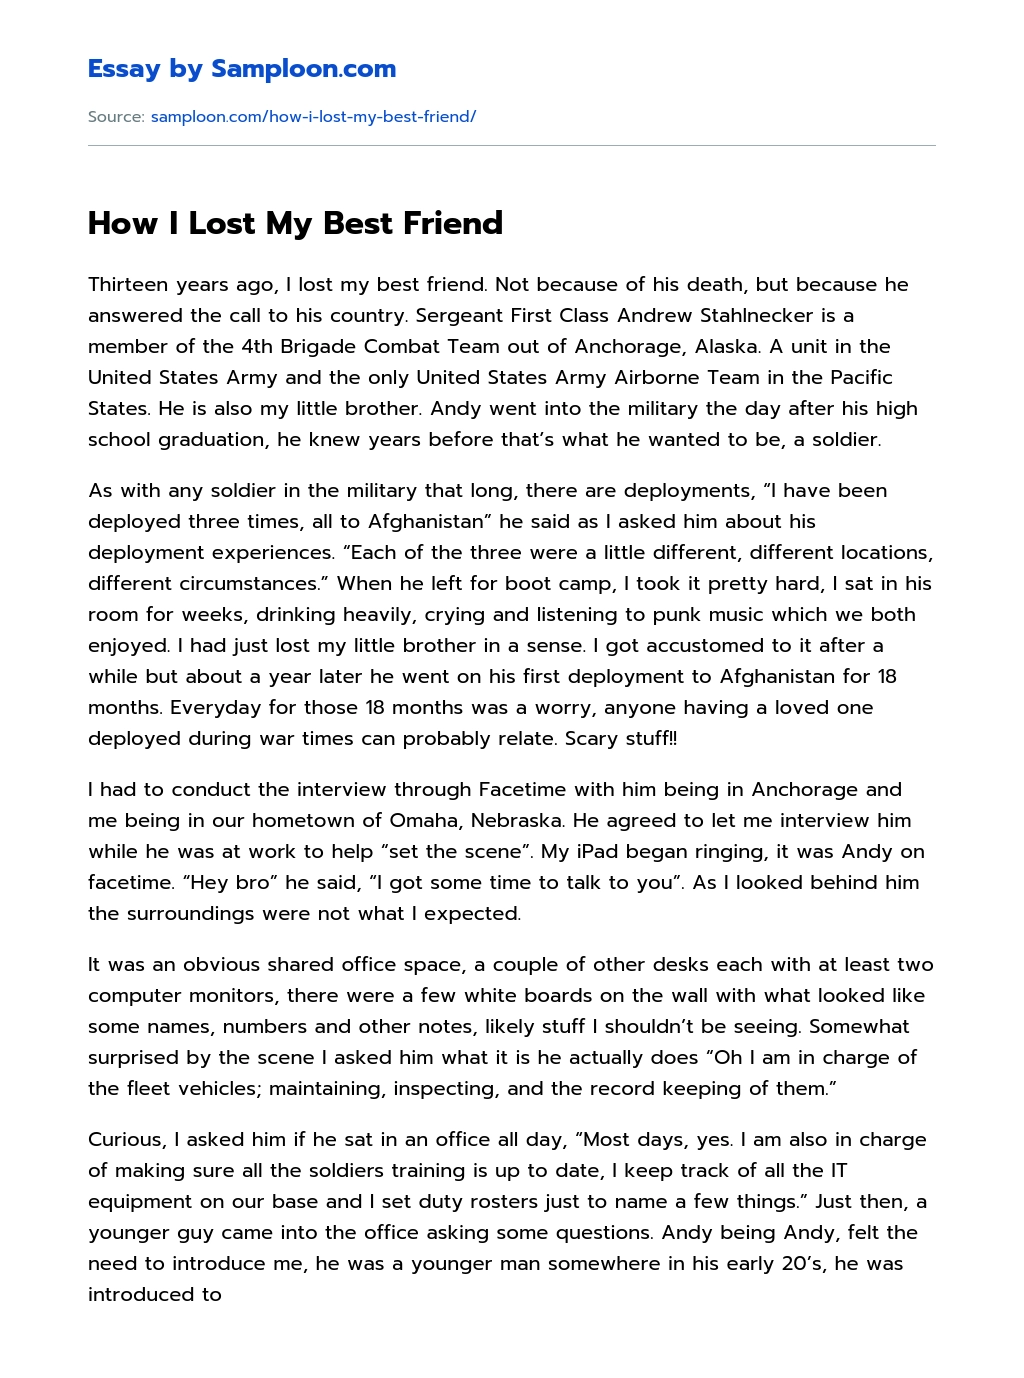 How I Lost My Best Friend essay